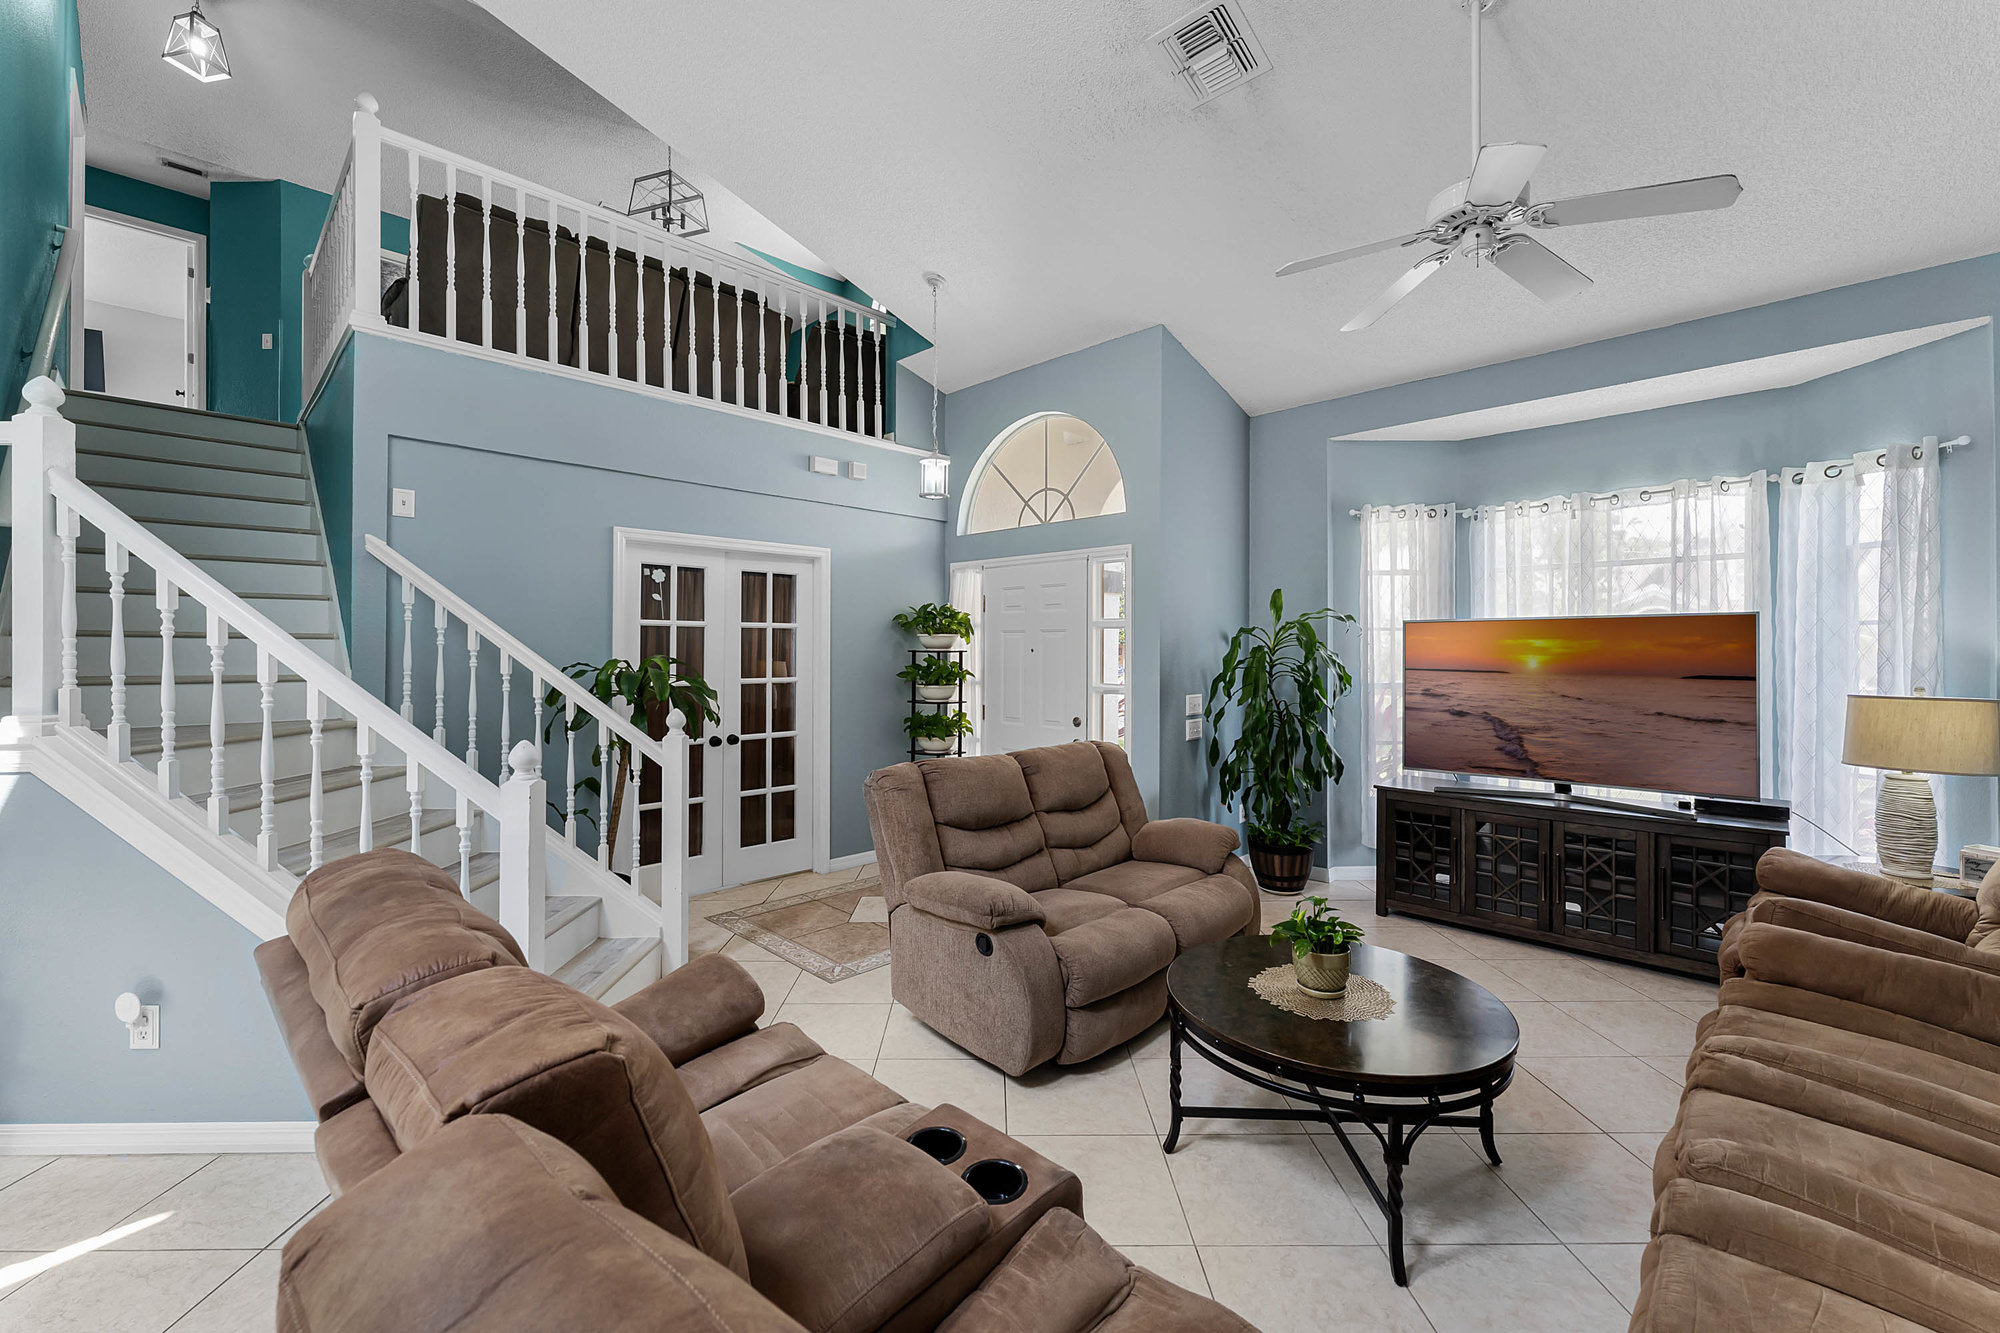 living space with light blue walls, brown couches and white railing going upstairs